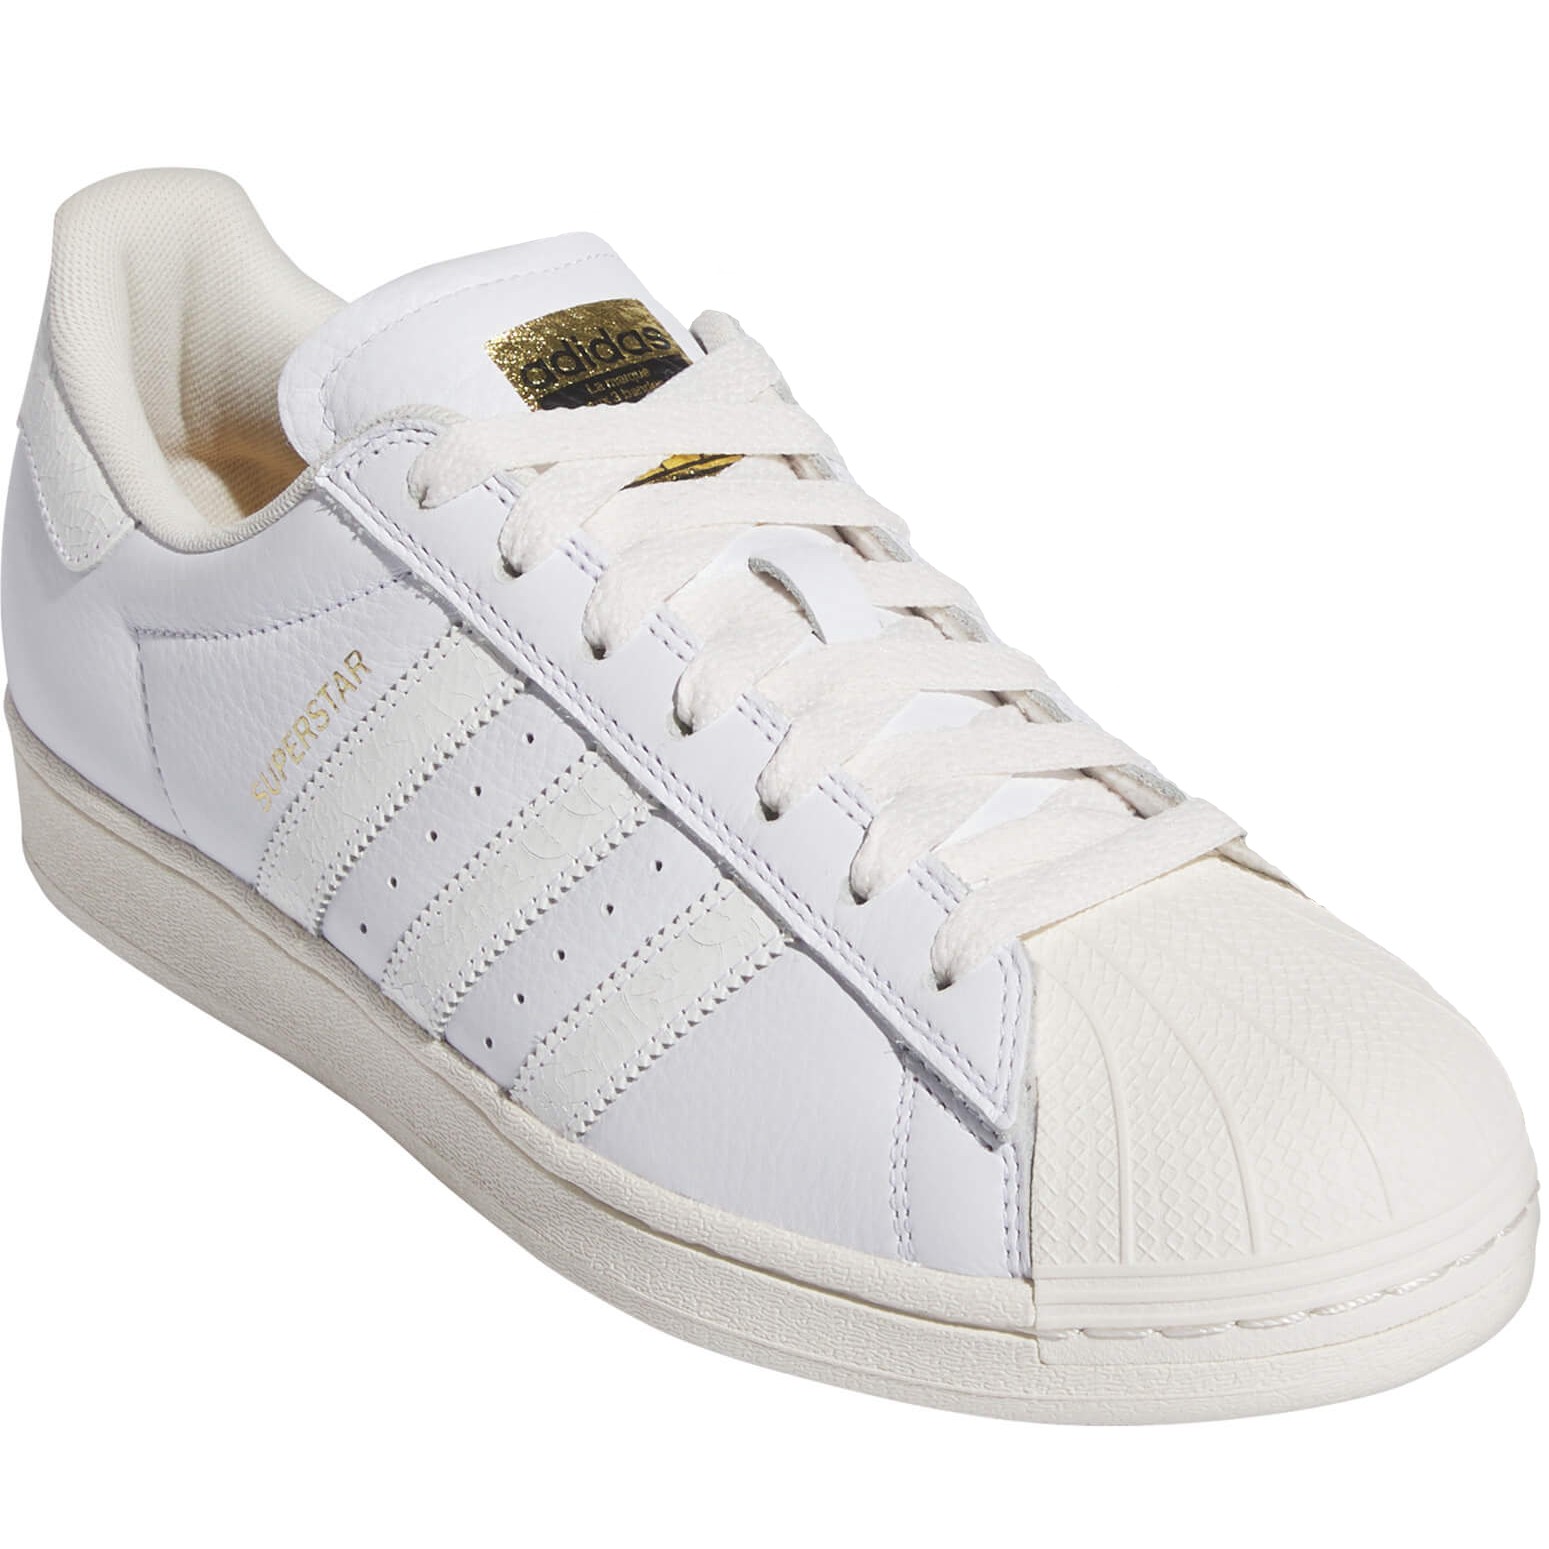 Adidas Superstar ADV Trainers/Skate Shoes